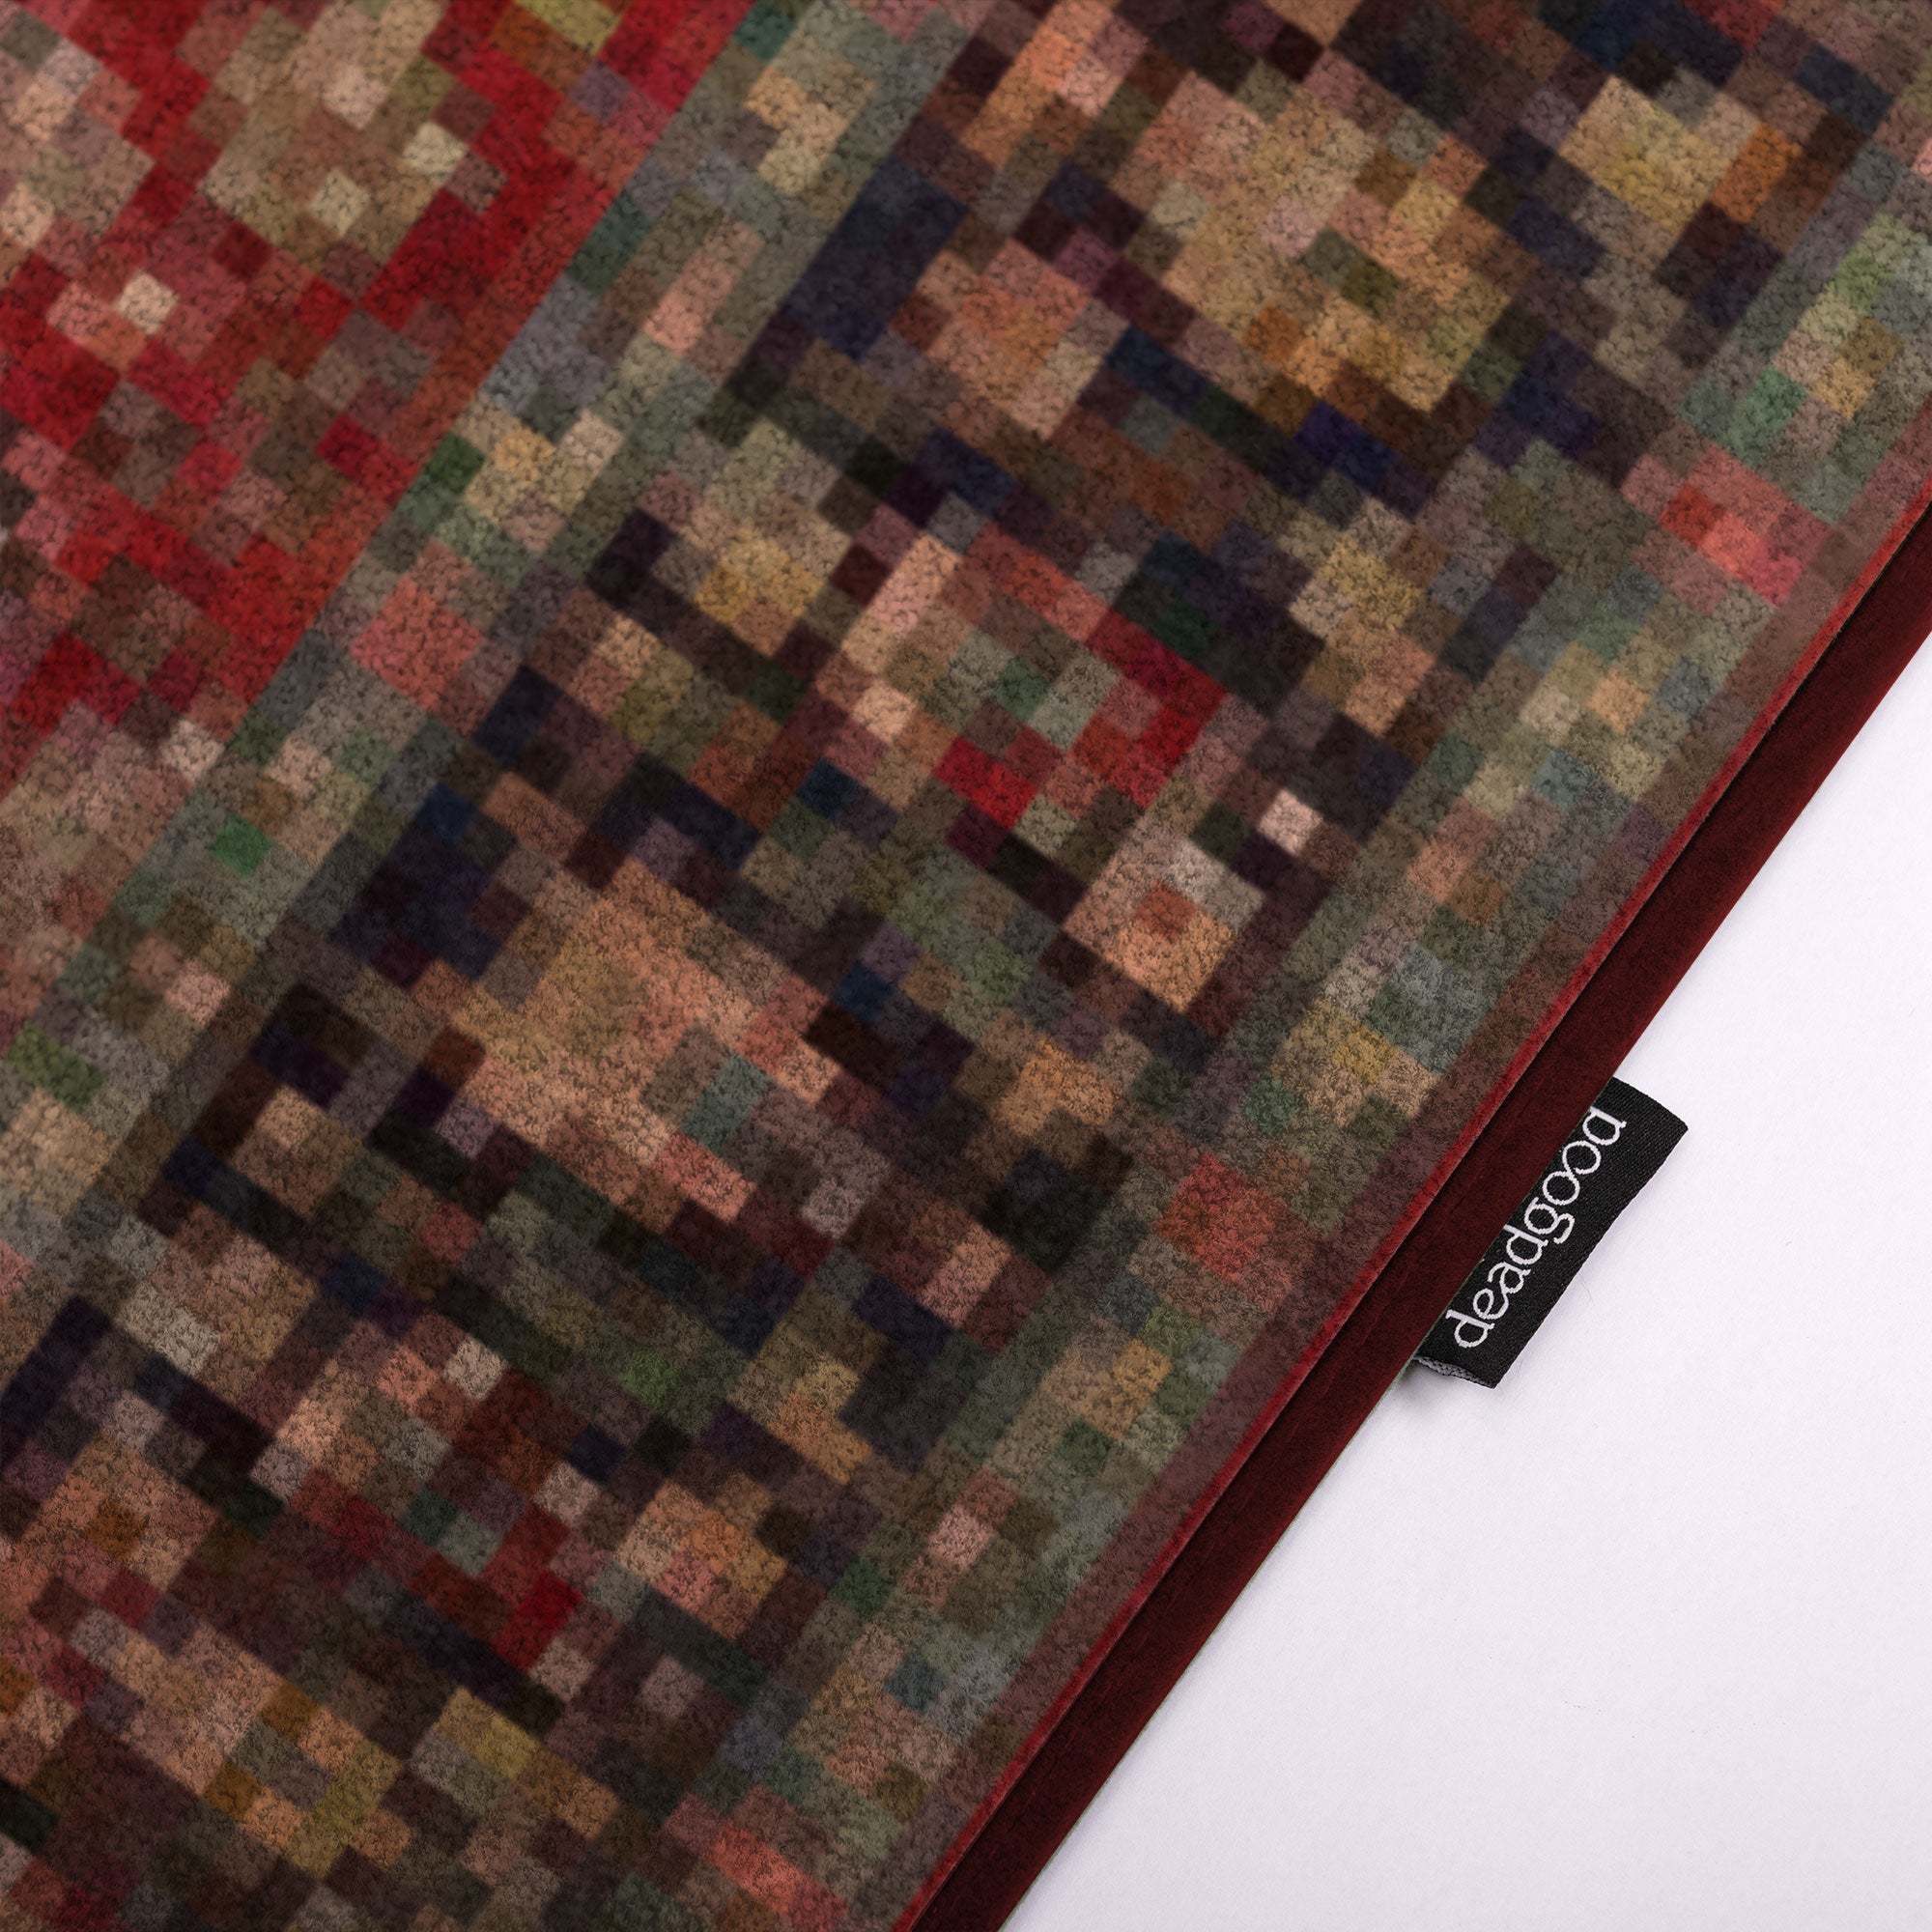 Detail of a subtle and elegant rug for upscale hotel suites